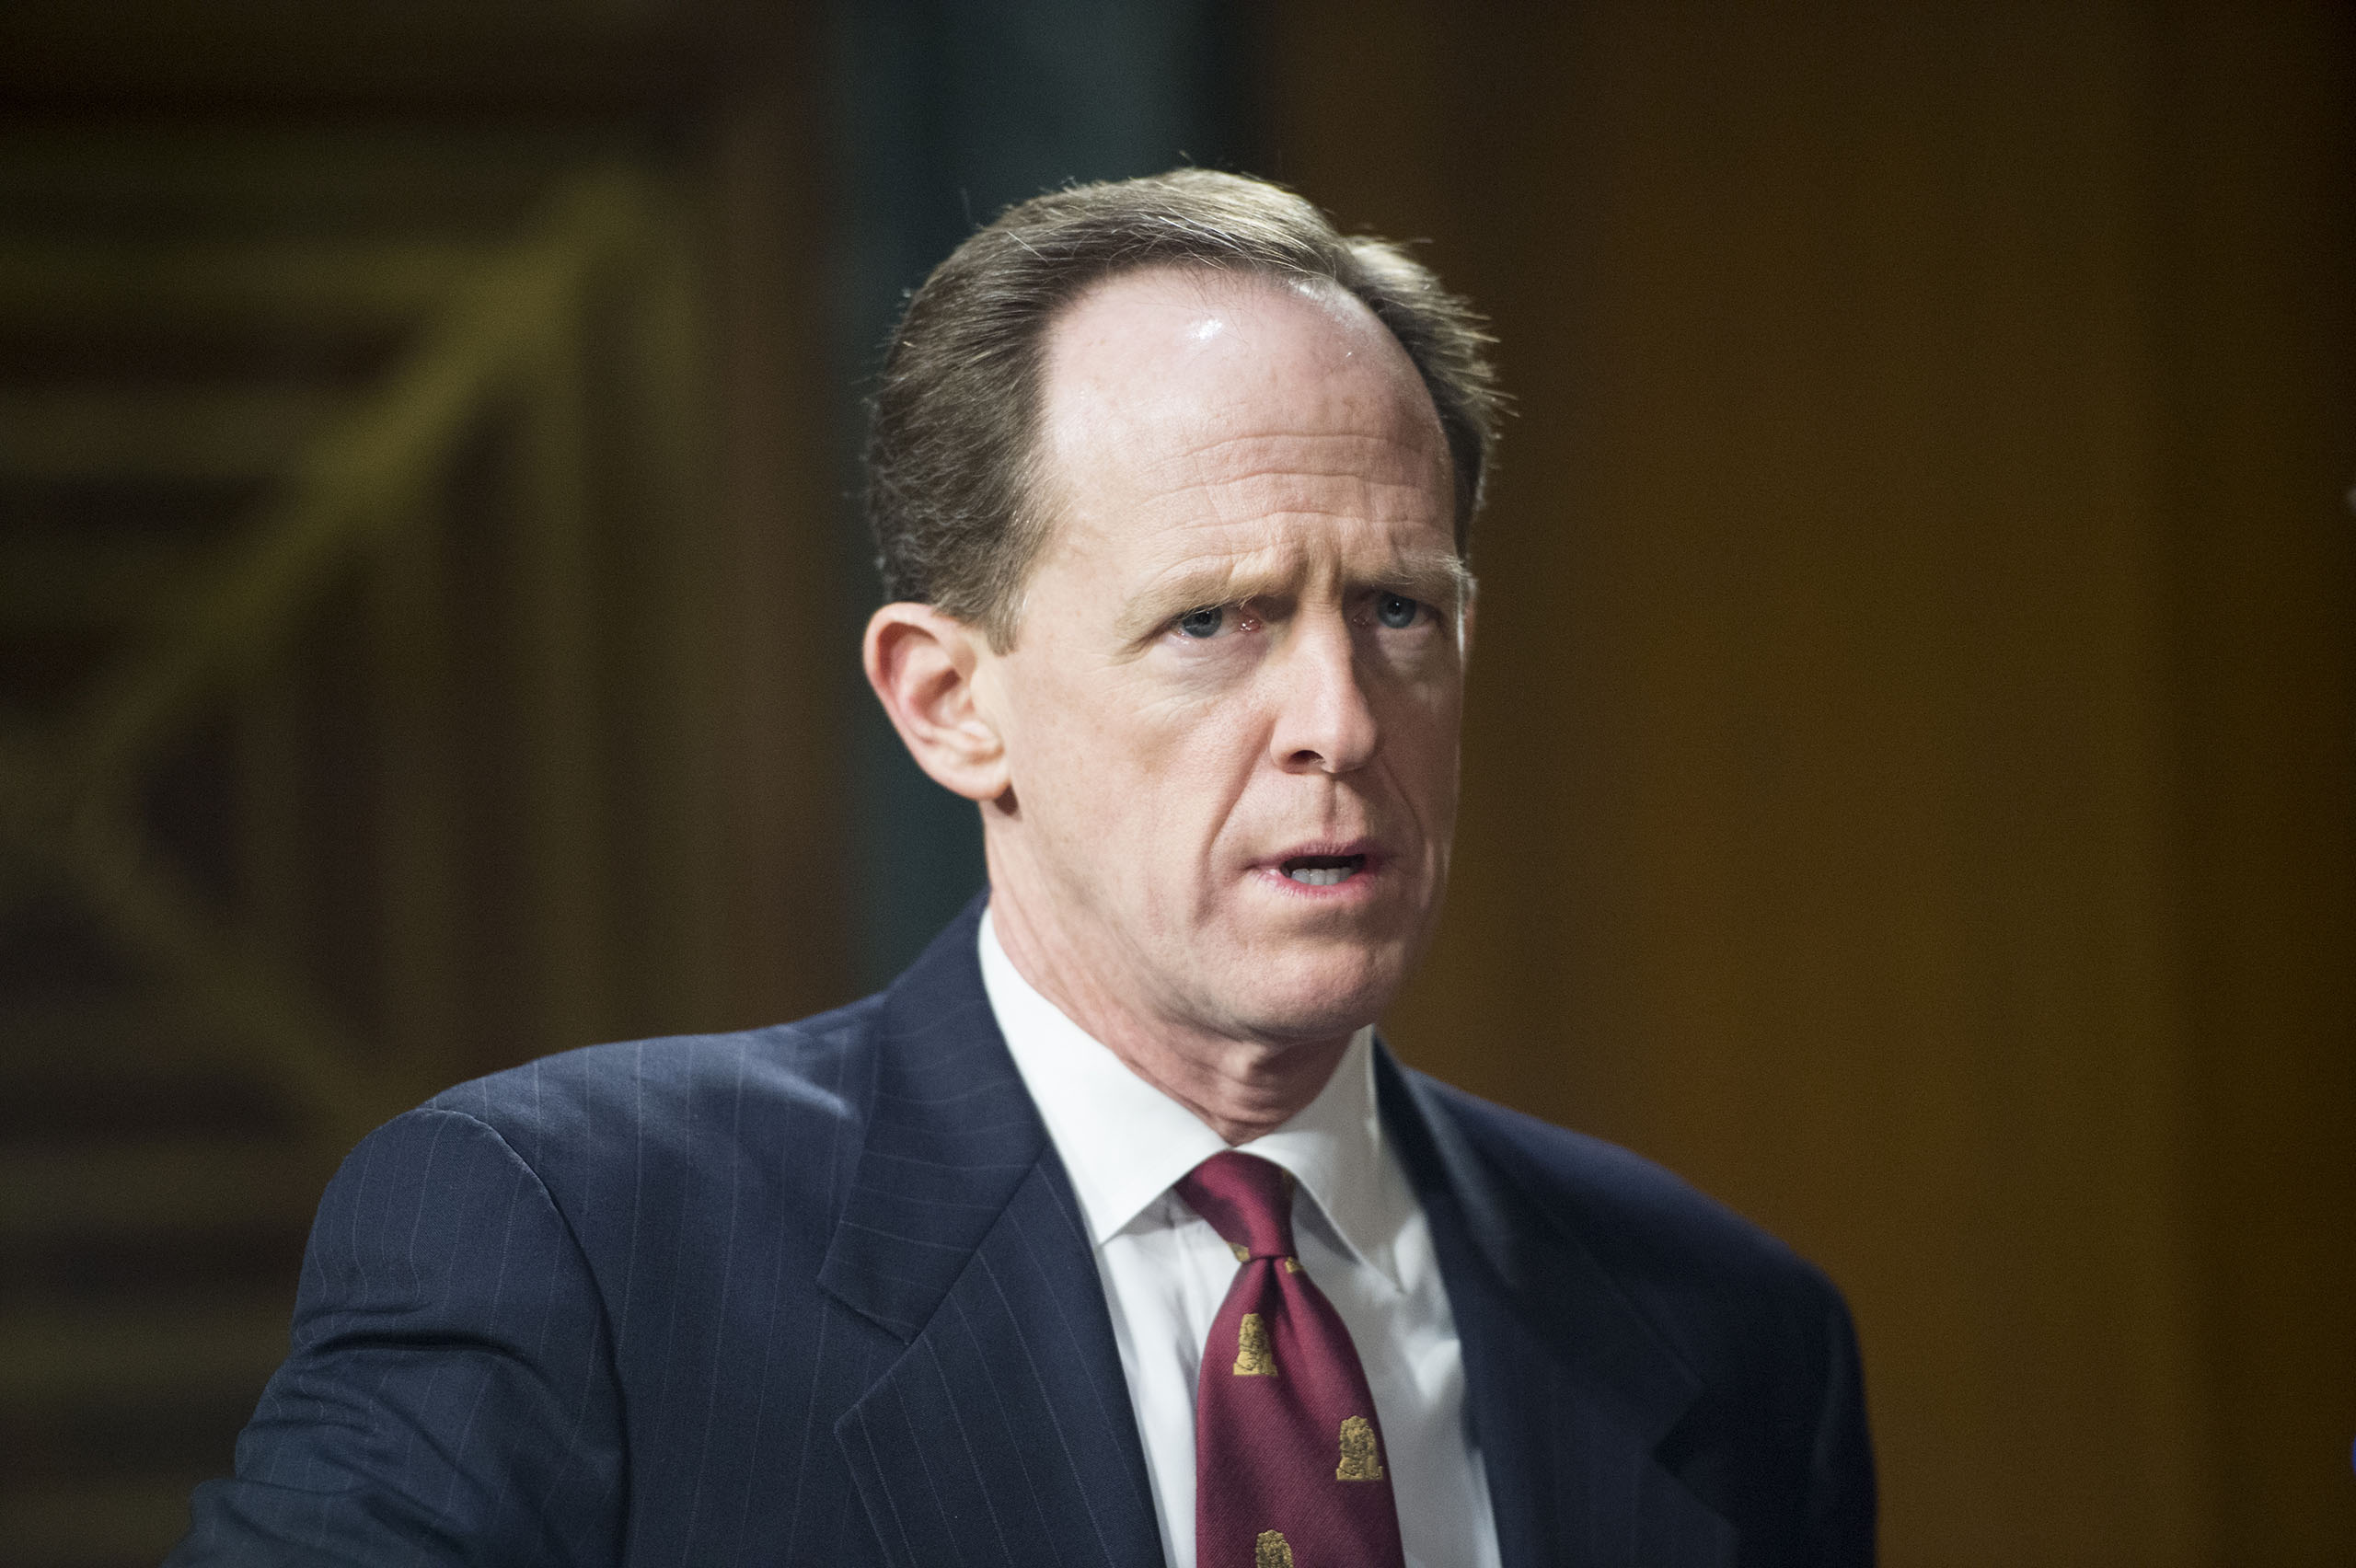 Pat Toomey arrives for the Senate Banking, Housing and Urban Affairs Committee hearing on 